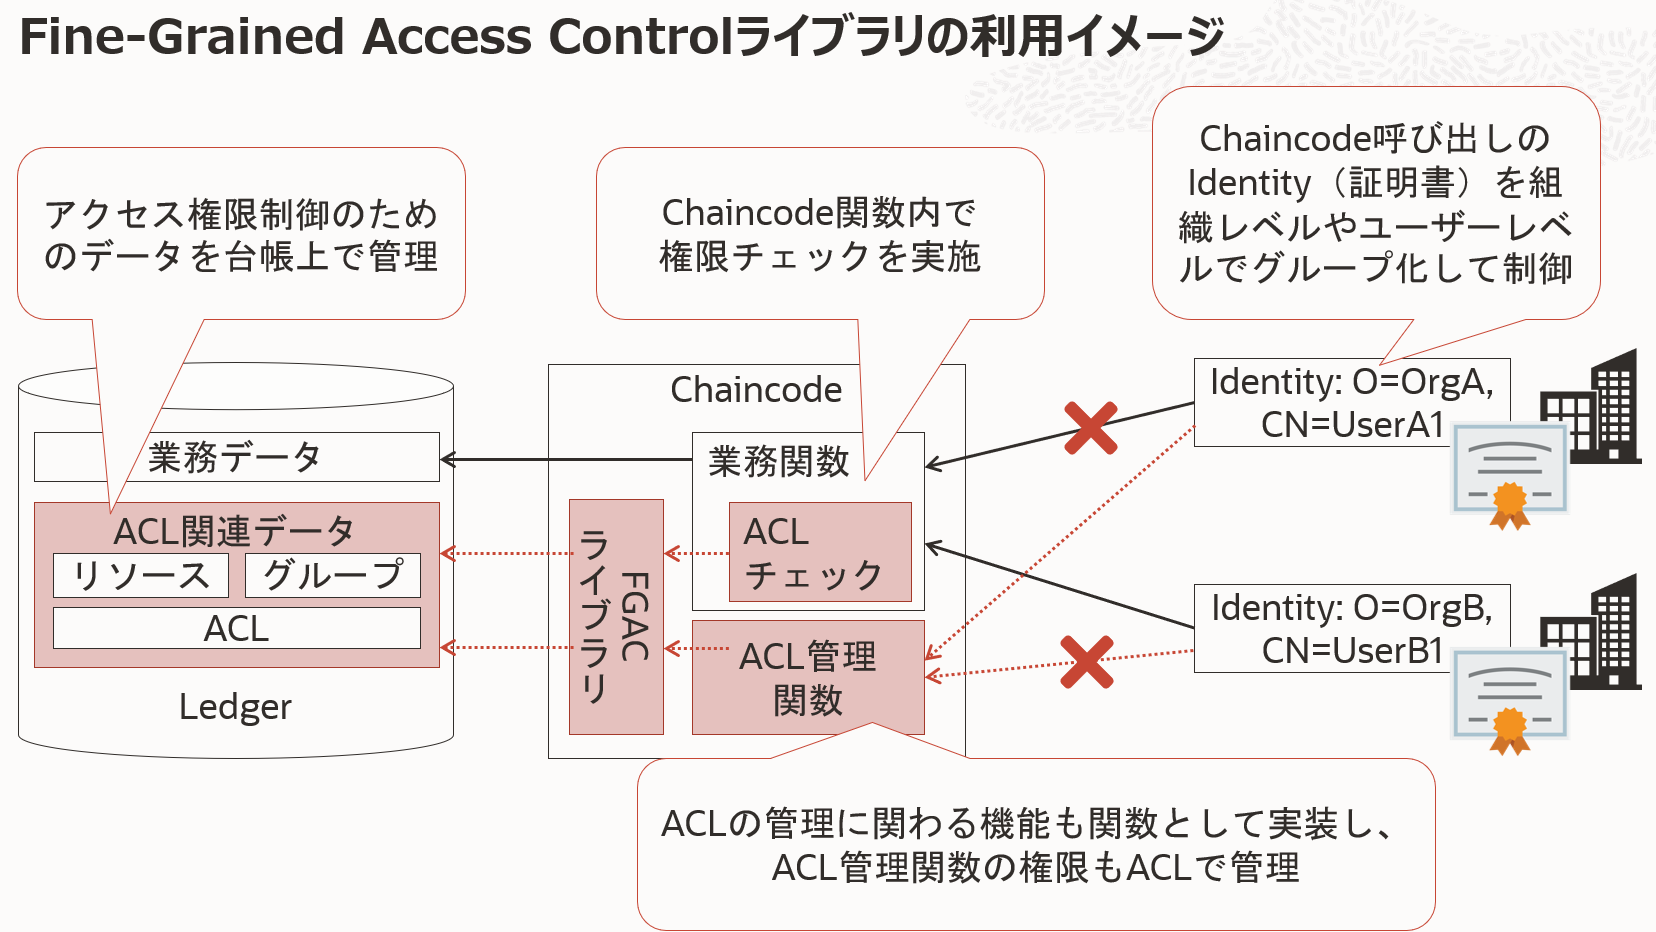 Fine-Grained Access Control Libraryの利用イメージ